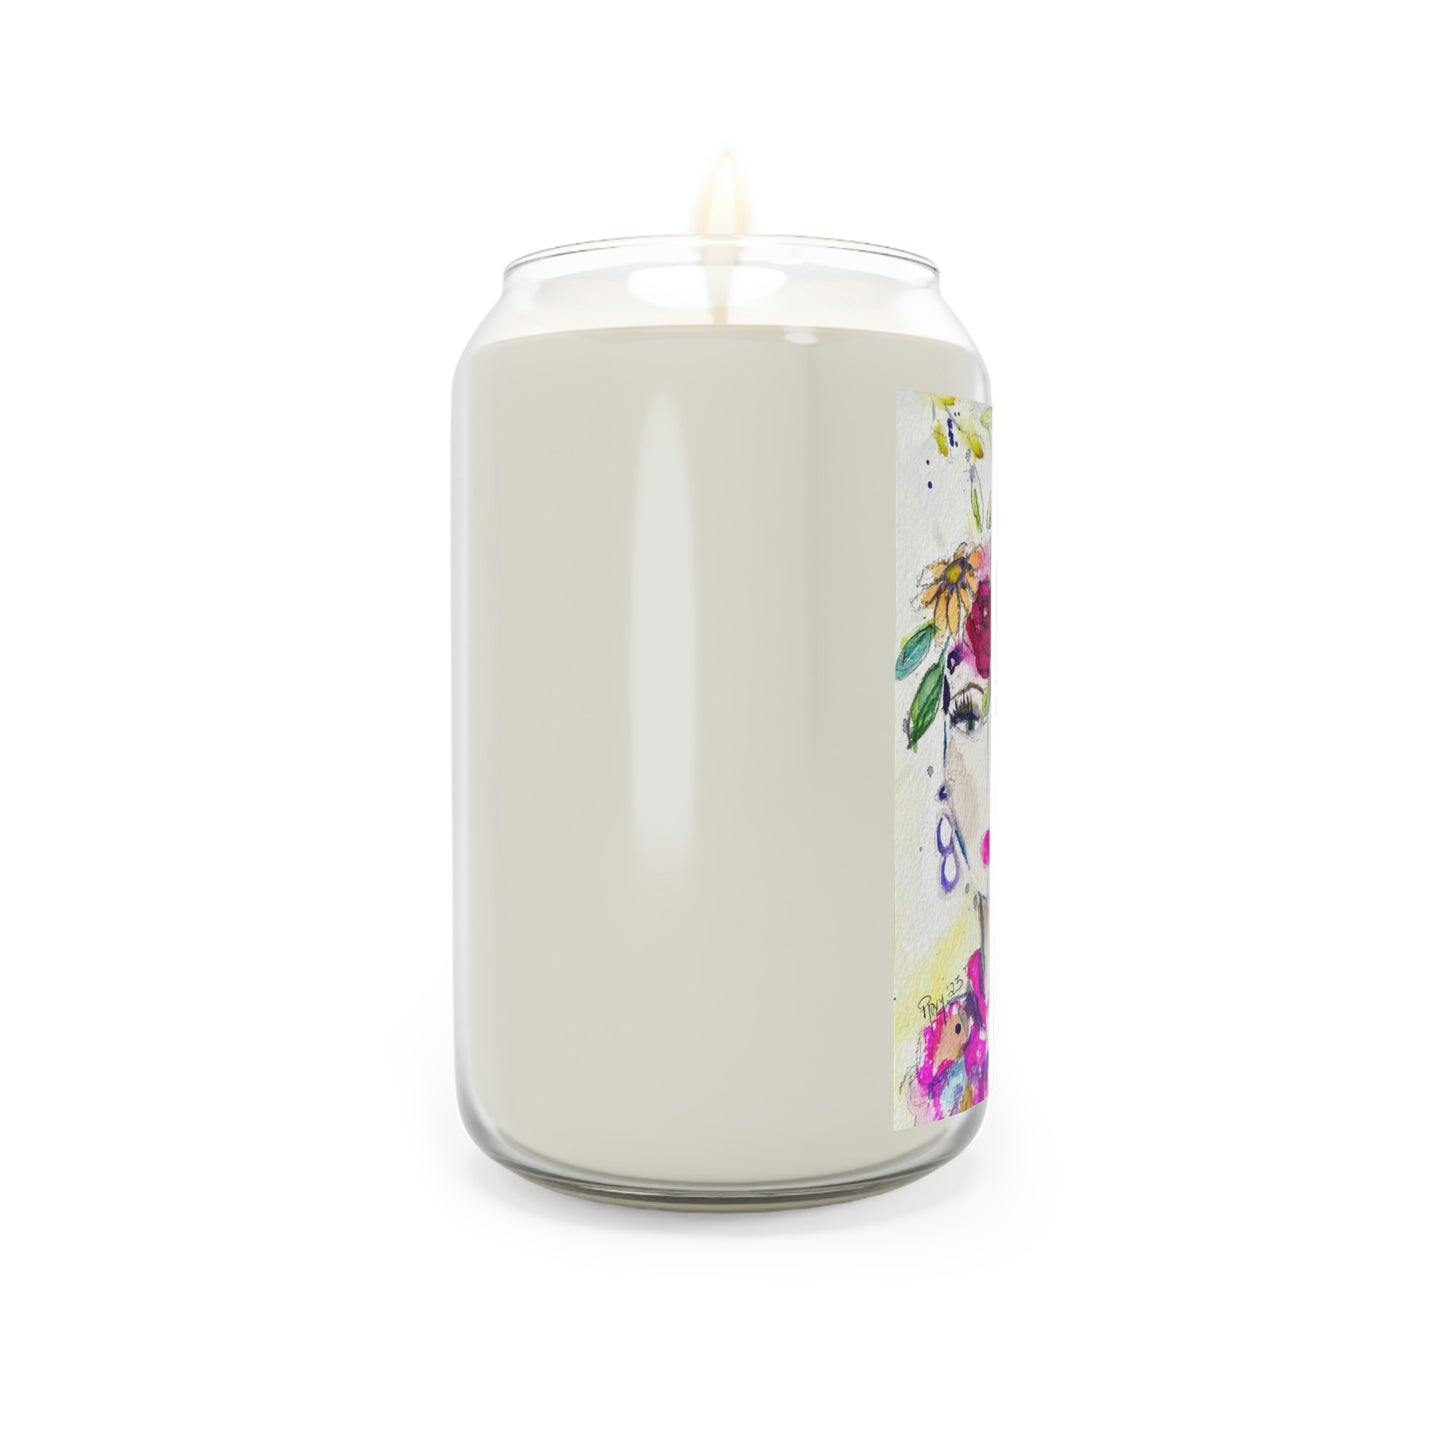 Haute Couture Hummingbird Scented Candle, 13.75oz